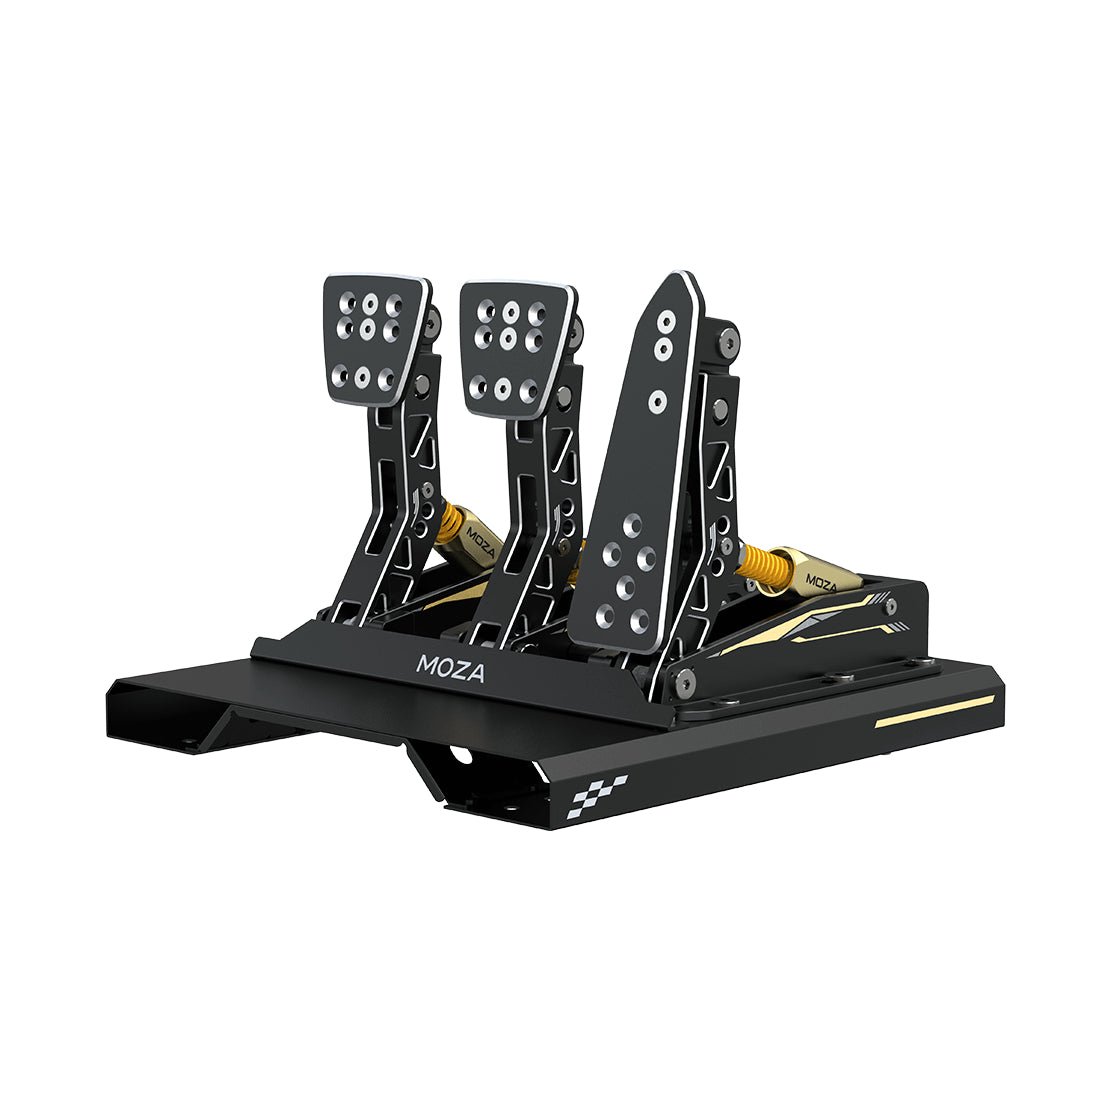 Moza CR-P Load Cell Pedals - Black - محاكي - Store 974 | ستور ٩٧٤